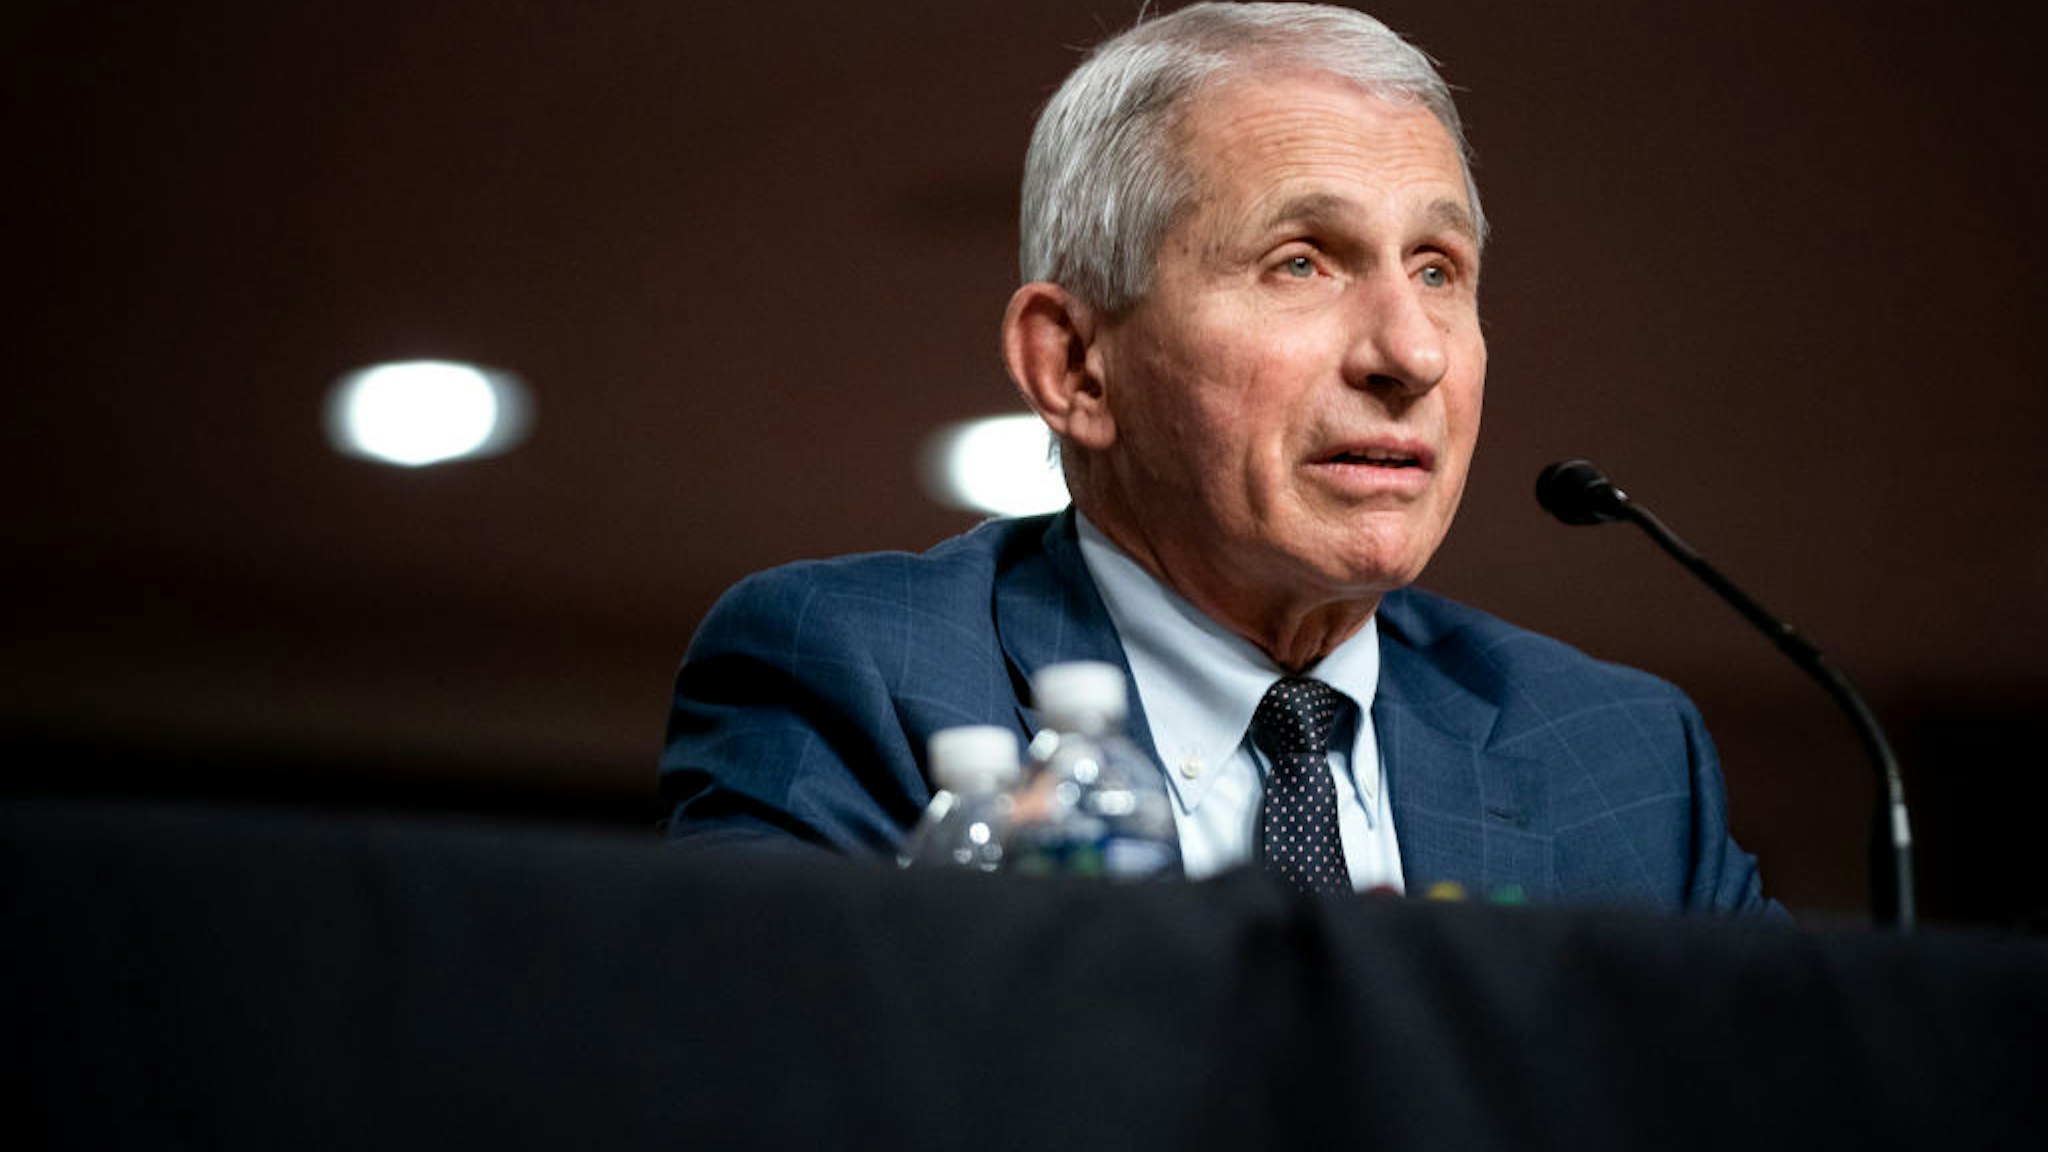 Dr. Anthony Fauci, White House Chief Medical Advisor and Director of the NIAID, testifies at a Senate Health, Education, Labor, and Pensions Committee hearing on Capitol Hill on January 11, 2022 in Washington, D.C.